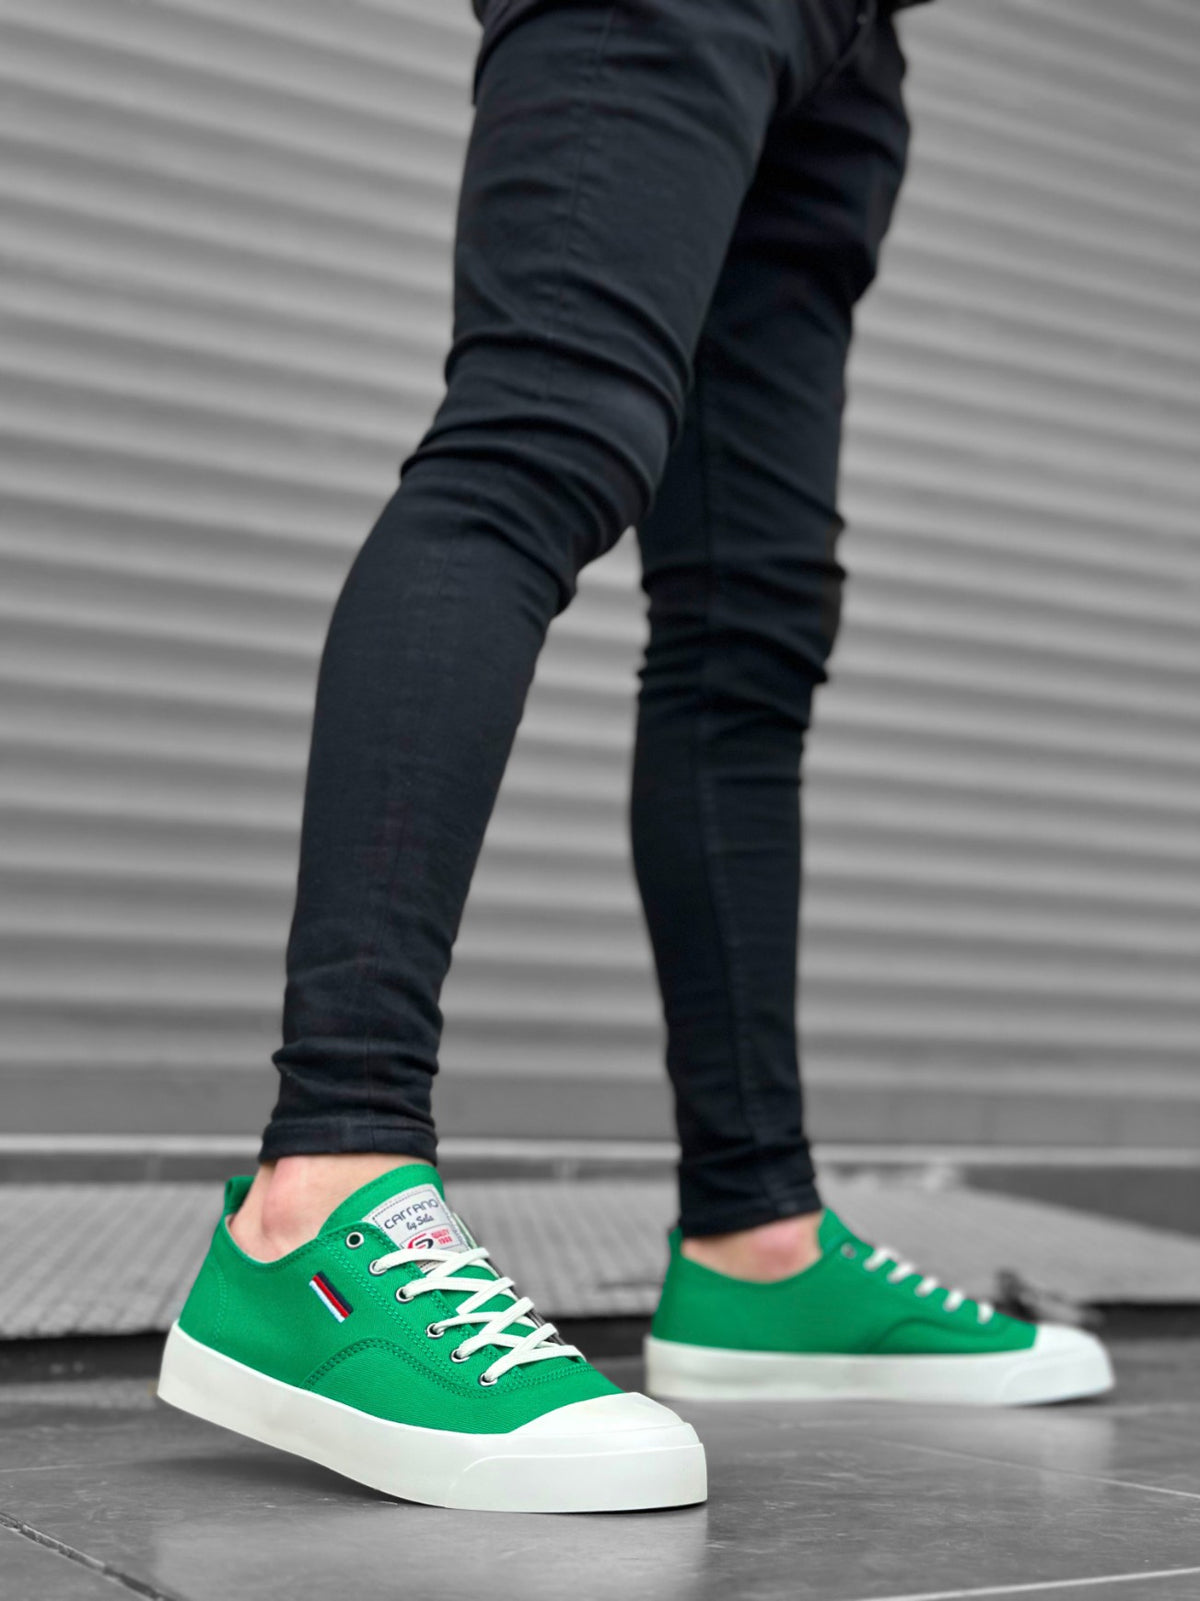 BA0223 Comfortable Flat Sole Linen Lace-Up Green Casual Men's Sneakers Shoes - STREETMODE™